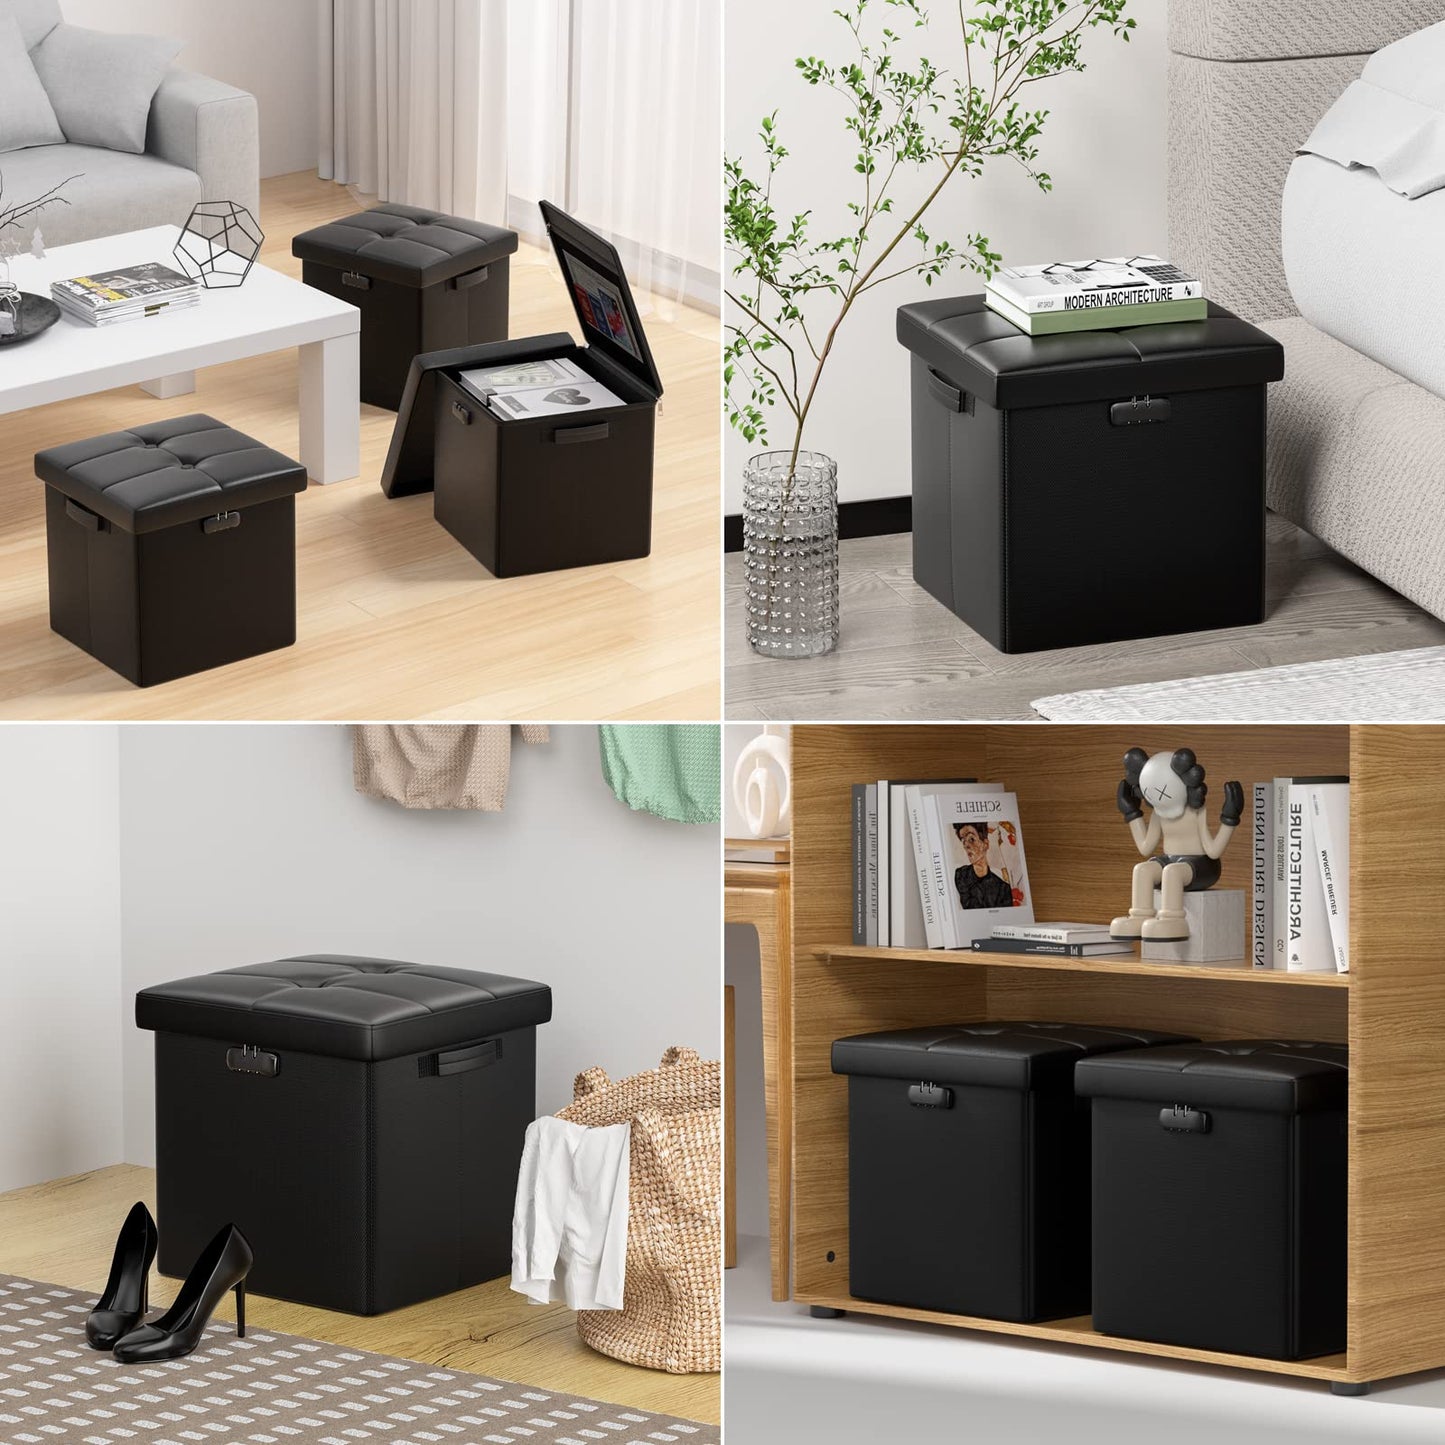 ENGPOW Storage Bench, Fireproof Folding Storage Bench with Lock, 76.2cm Fireproof and Waterproof Storage Chest Footstool Leather Bedroom Bench, Can Store Documents, Valuables, Black